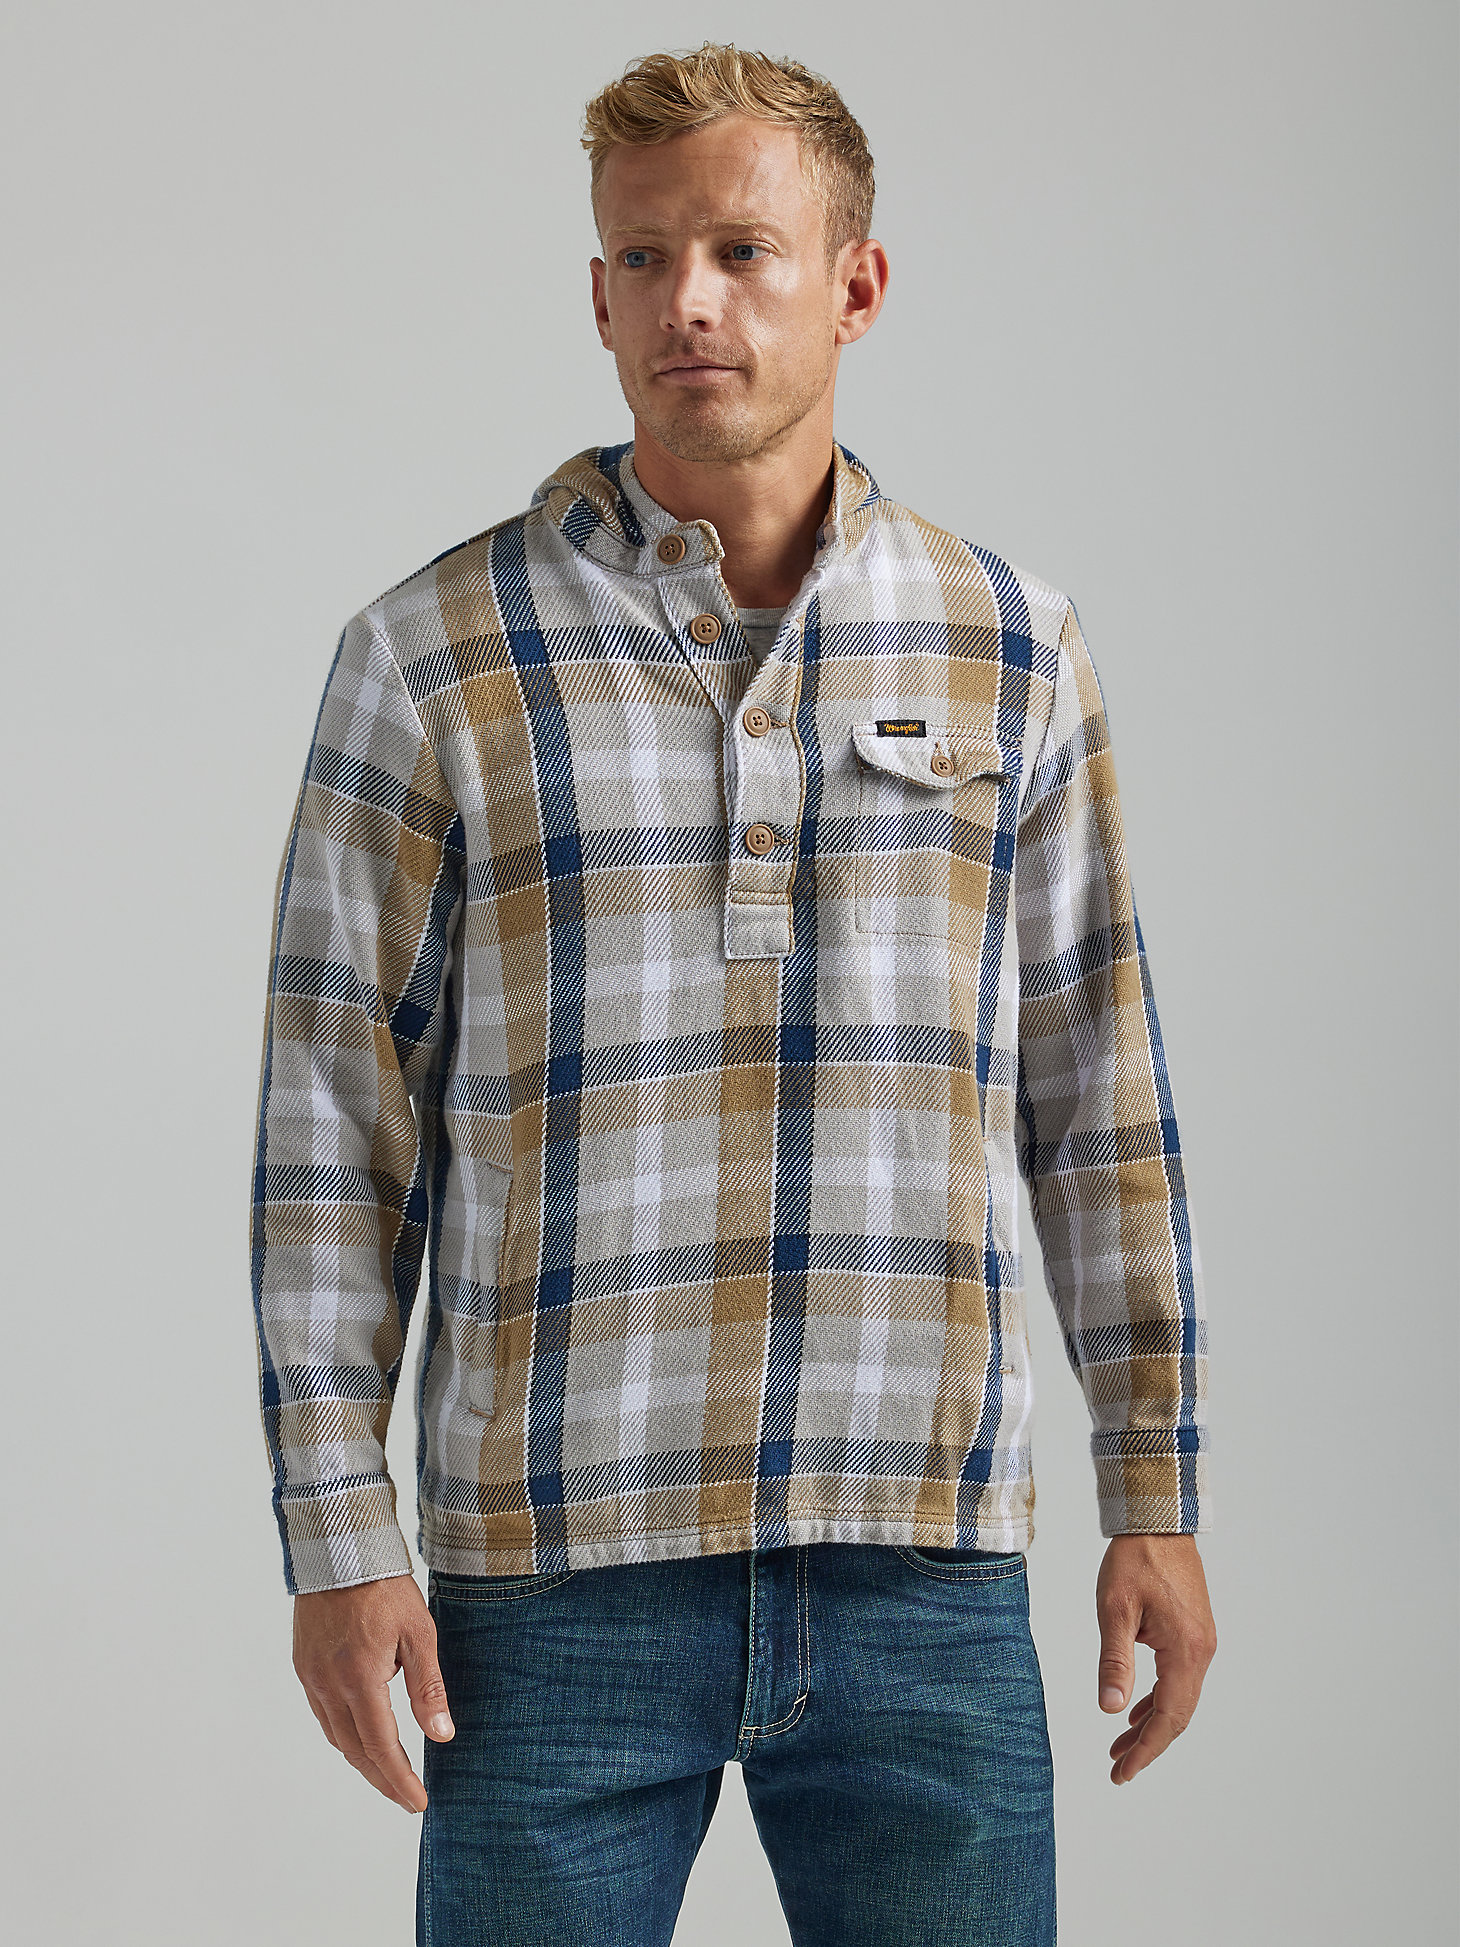 Men's Lightweight Button Front Plaid Hooded Popover Jacket